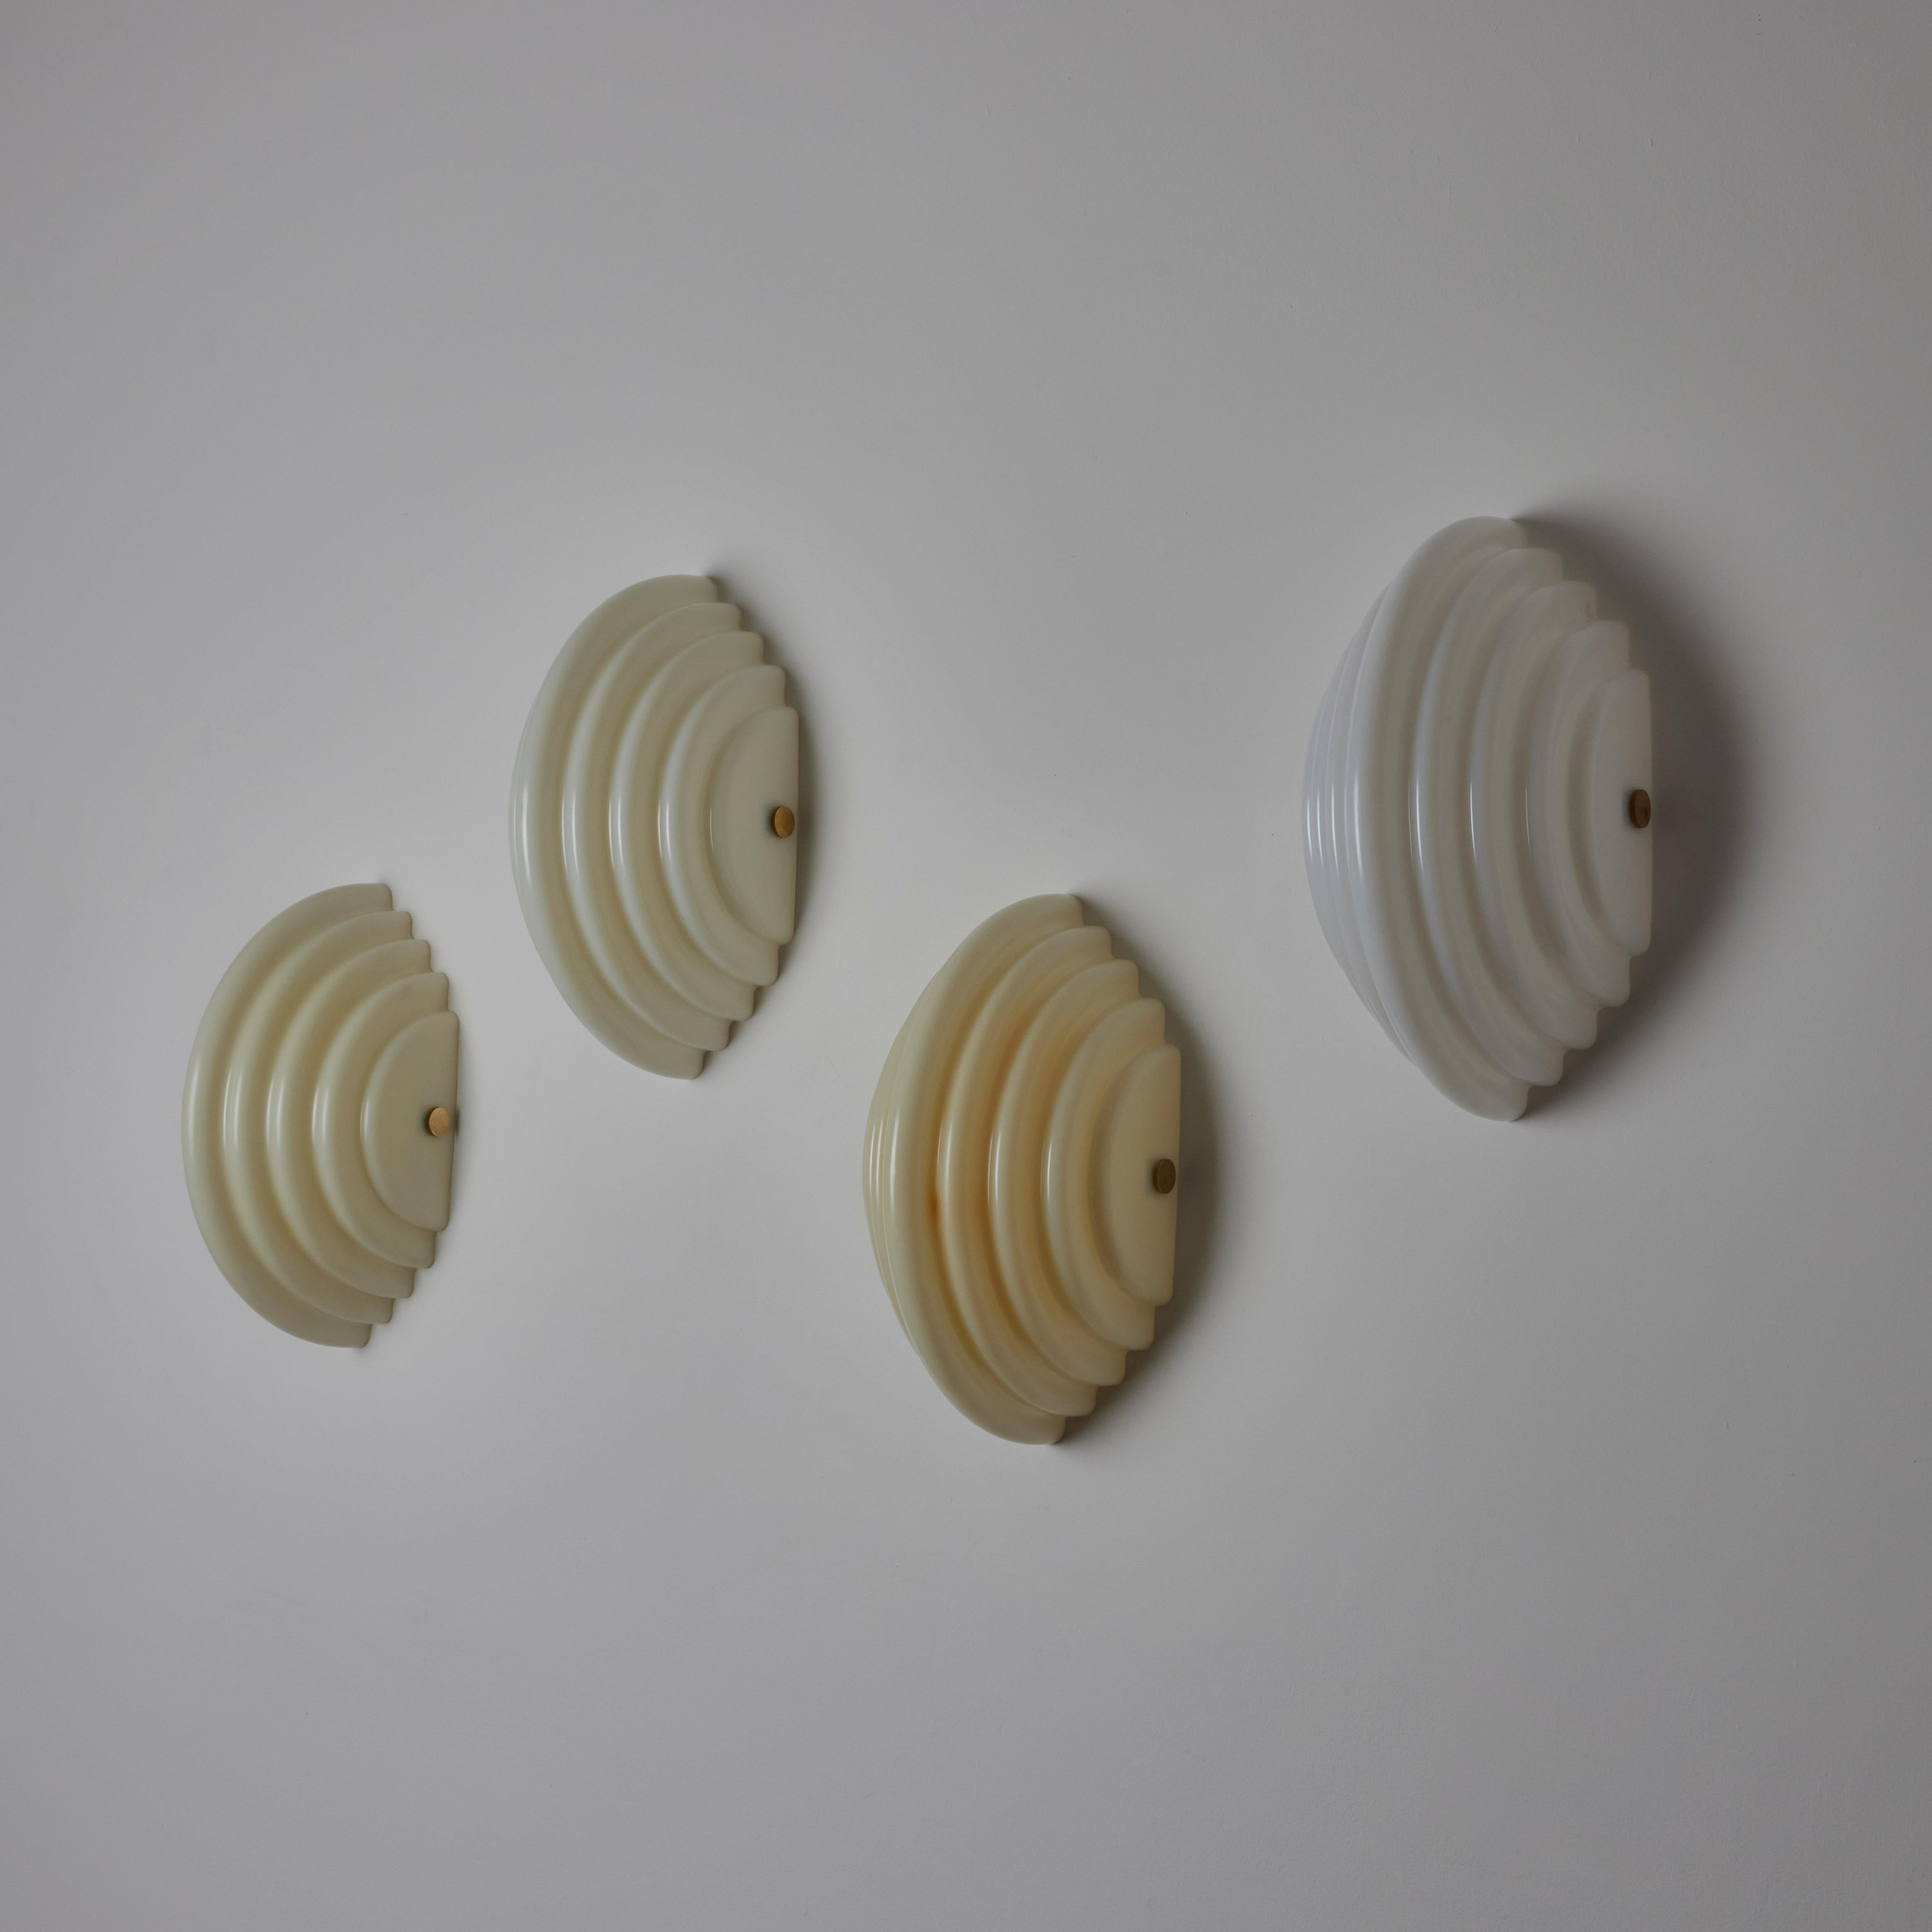 'Kumo 2' Sconces by Kazuhide Takahma for Sirrah In Good Condition For Sale In Los Angeles, CA